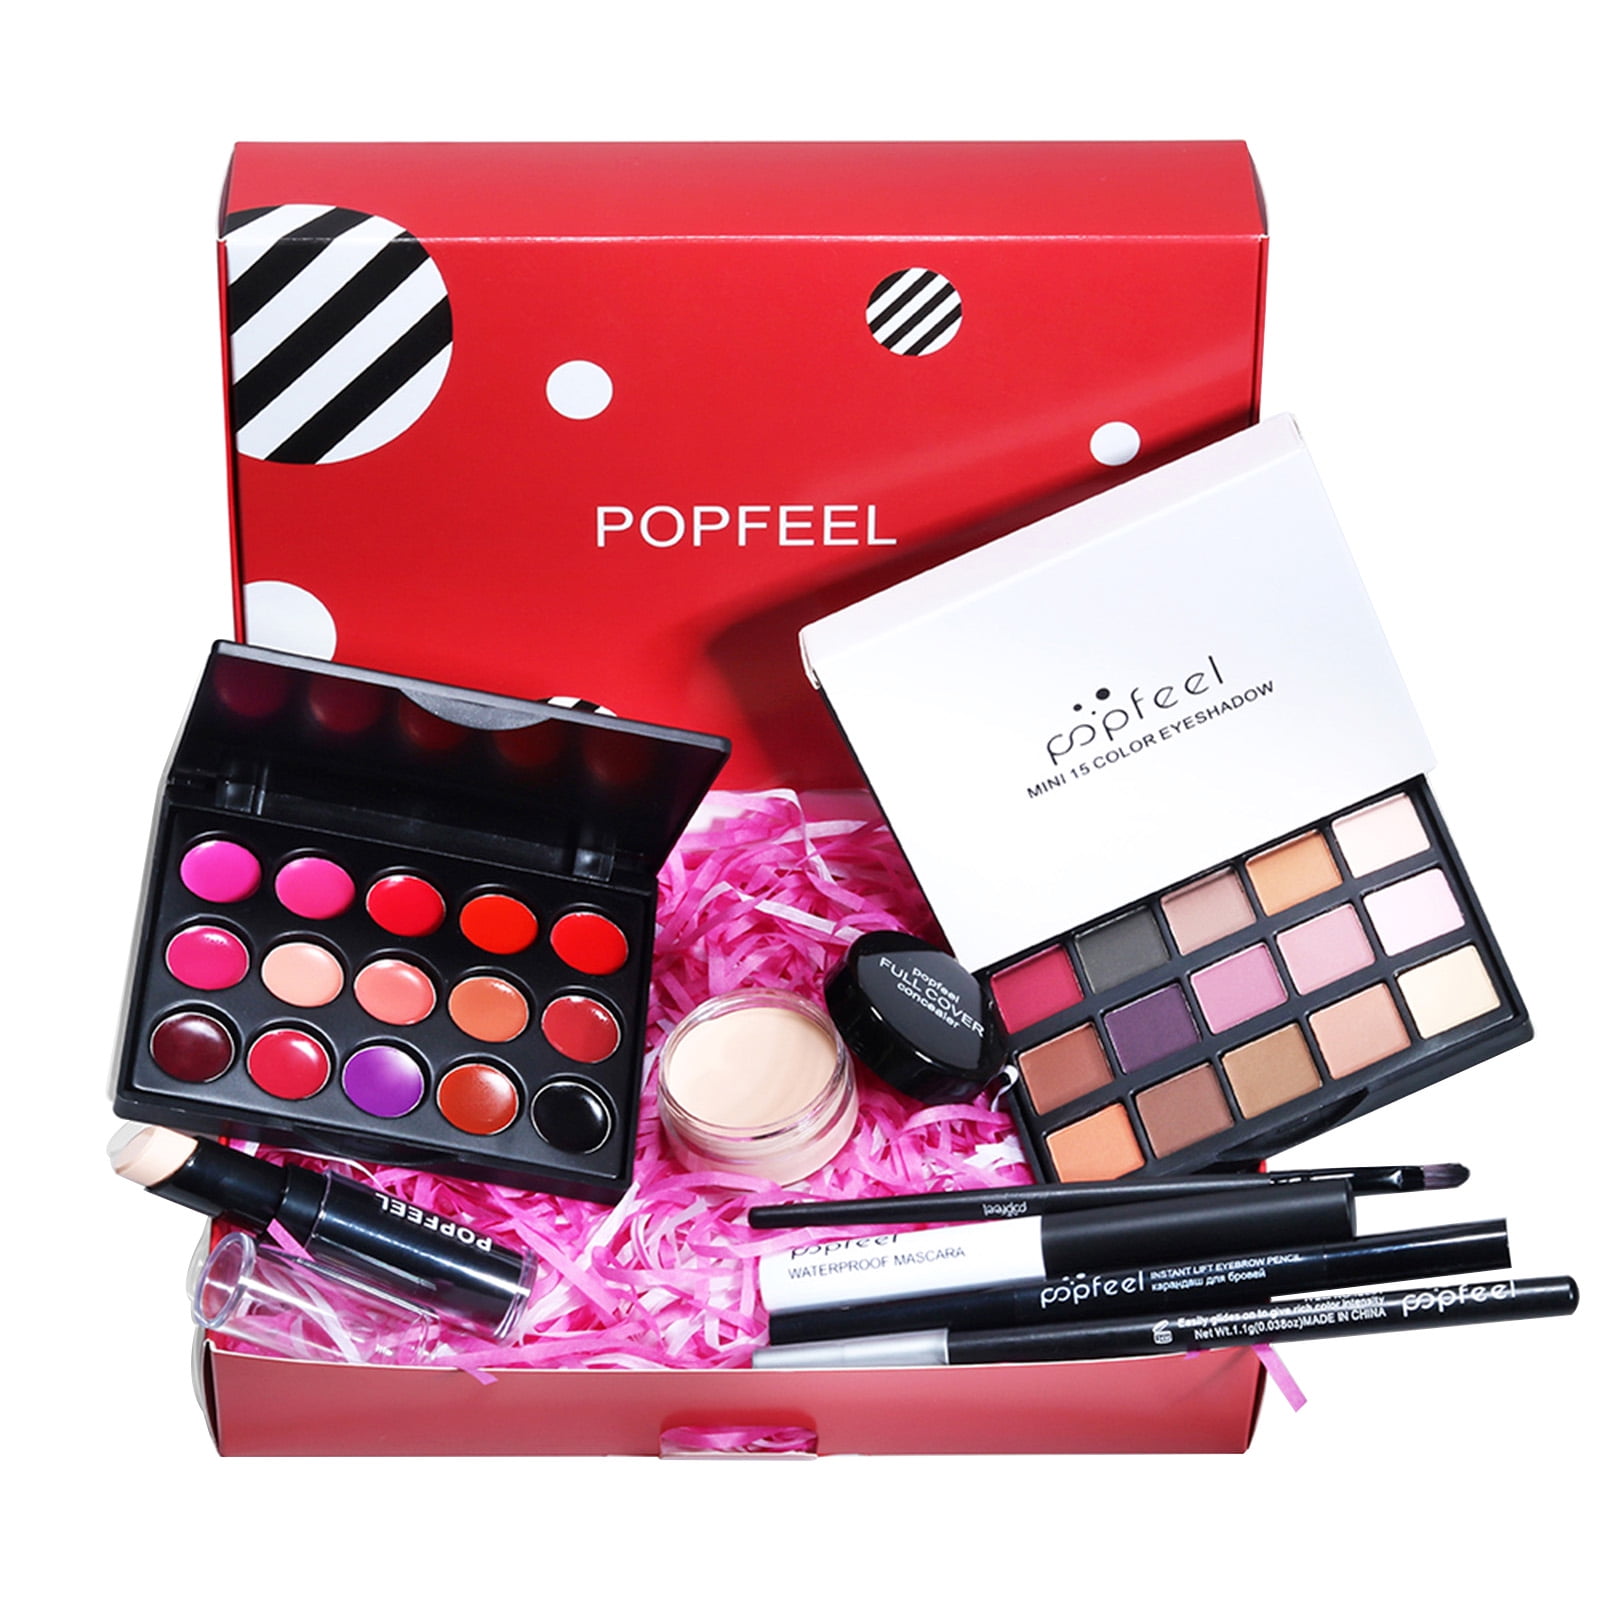 FantasyDay All-In-One Makeup Set Gift Surprise | Full Makeup Kit for Women Cosmetic Essential Starter Bundle Include Eyeshadow Palette Lipstick Blush